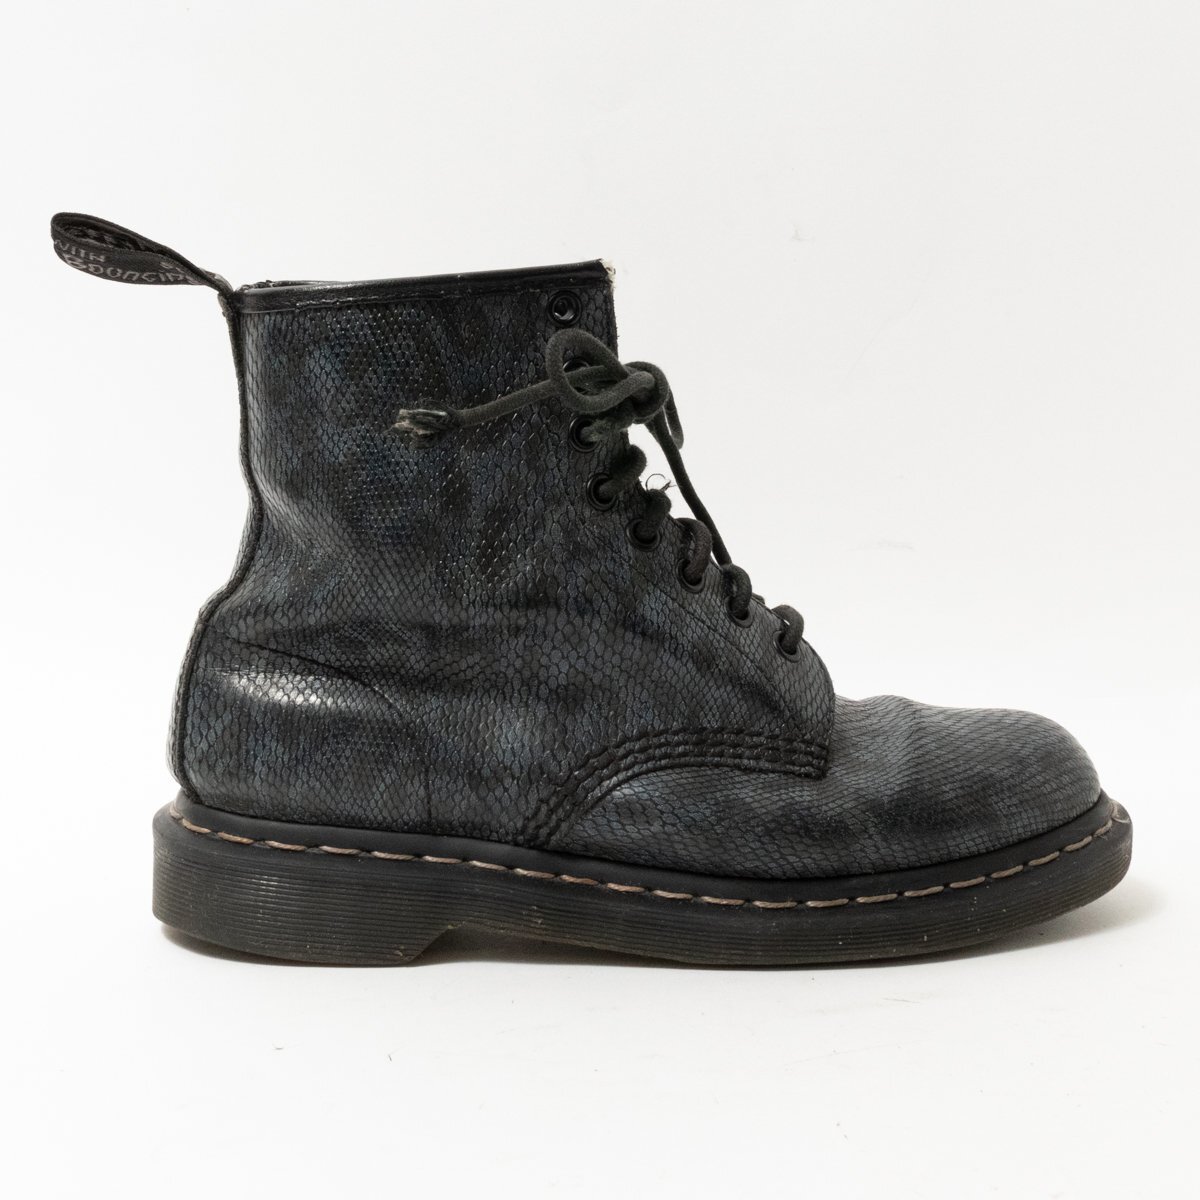 [1 jpy start ]Dr.Martens Dr. Martens python type pushed .8 hole boots race up shoes shoes navy black US7 24.5cm corresponding 